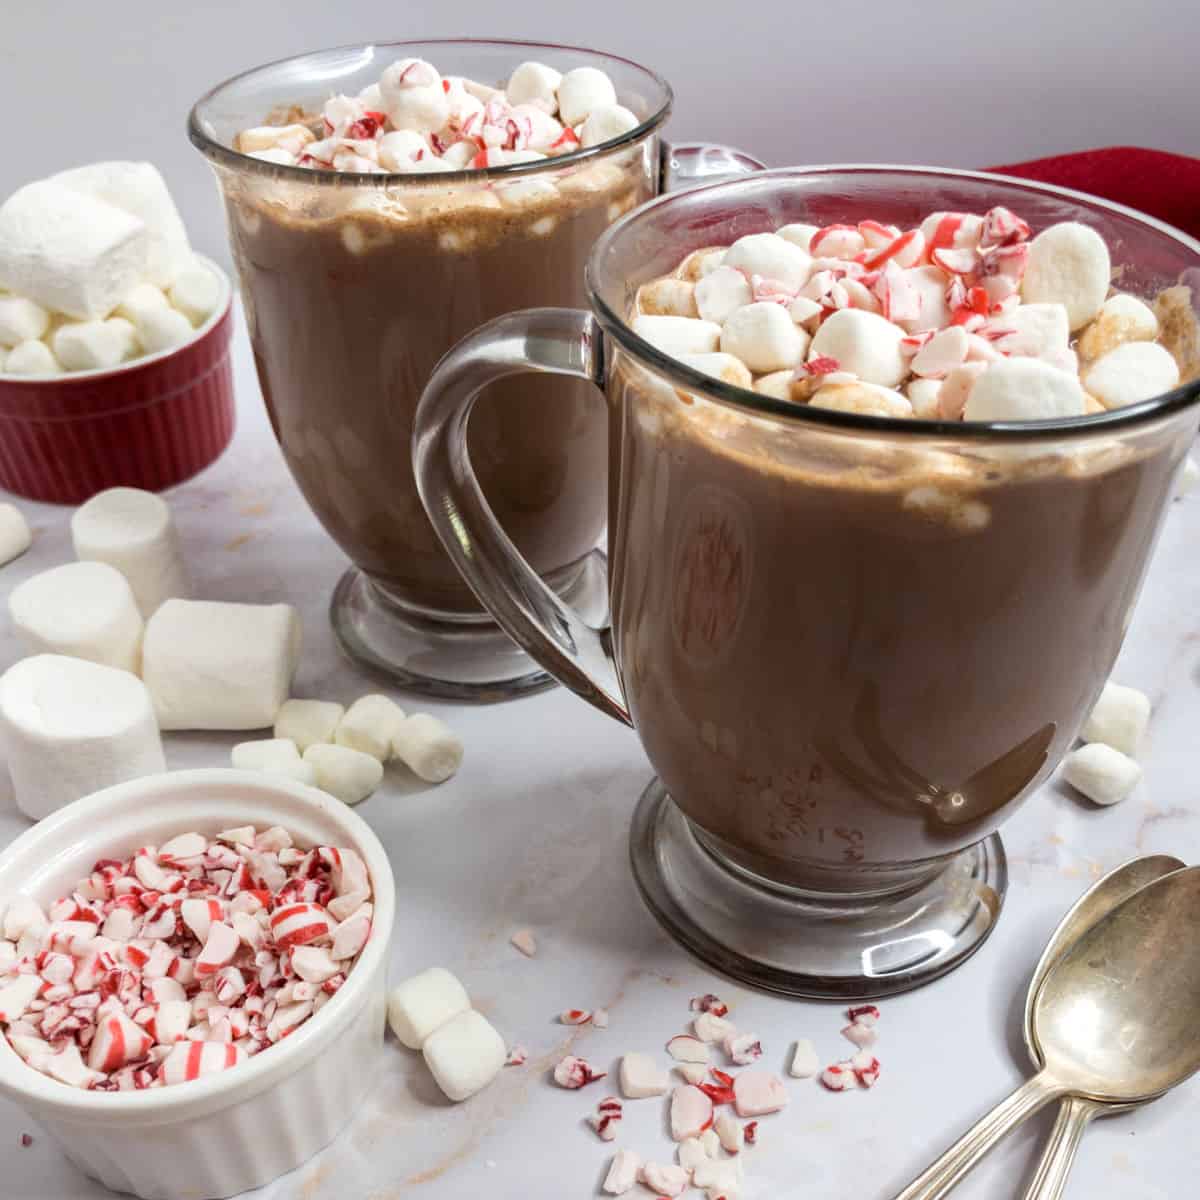 Two mug of cocoa with marshmallows and peppermint candies.